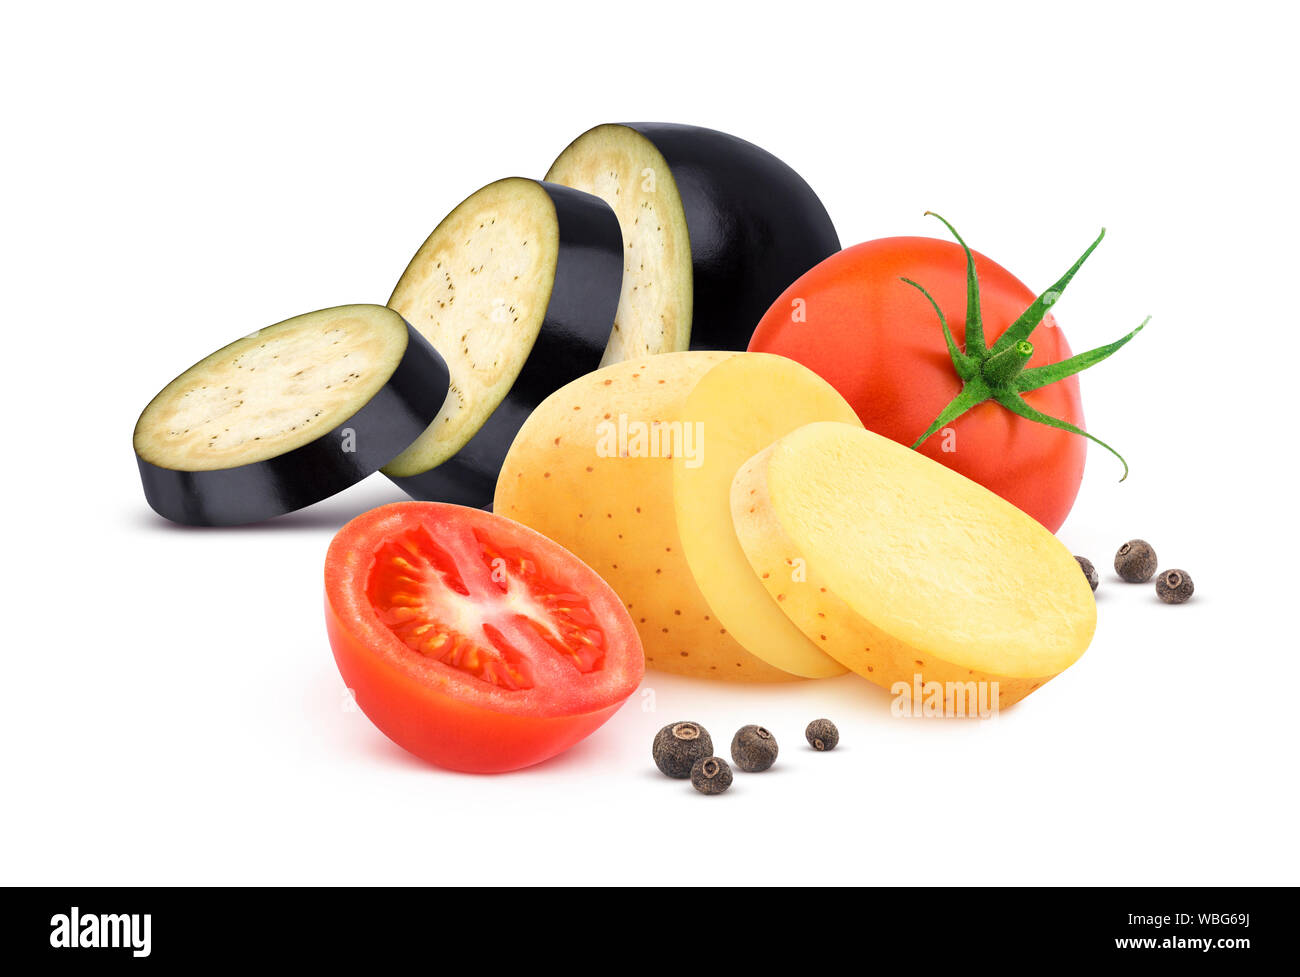 Vegetables isolated on white background, cut tomato, eggplant and potato with spices Stock Photo